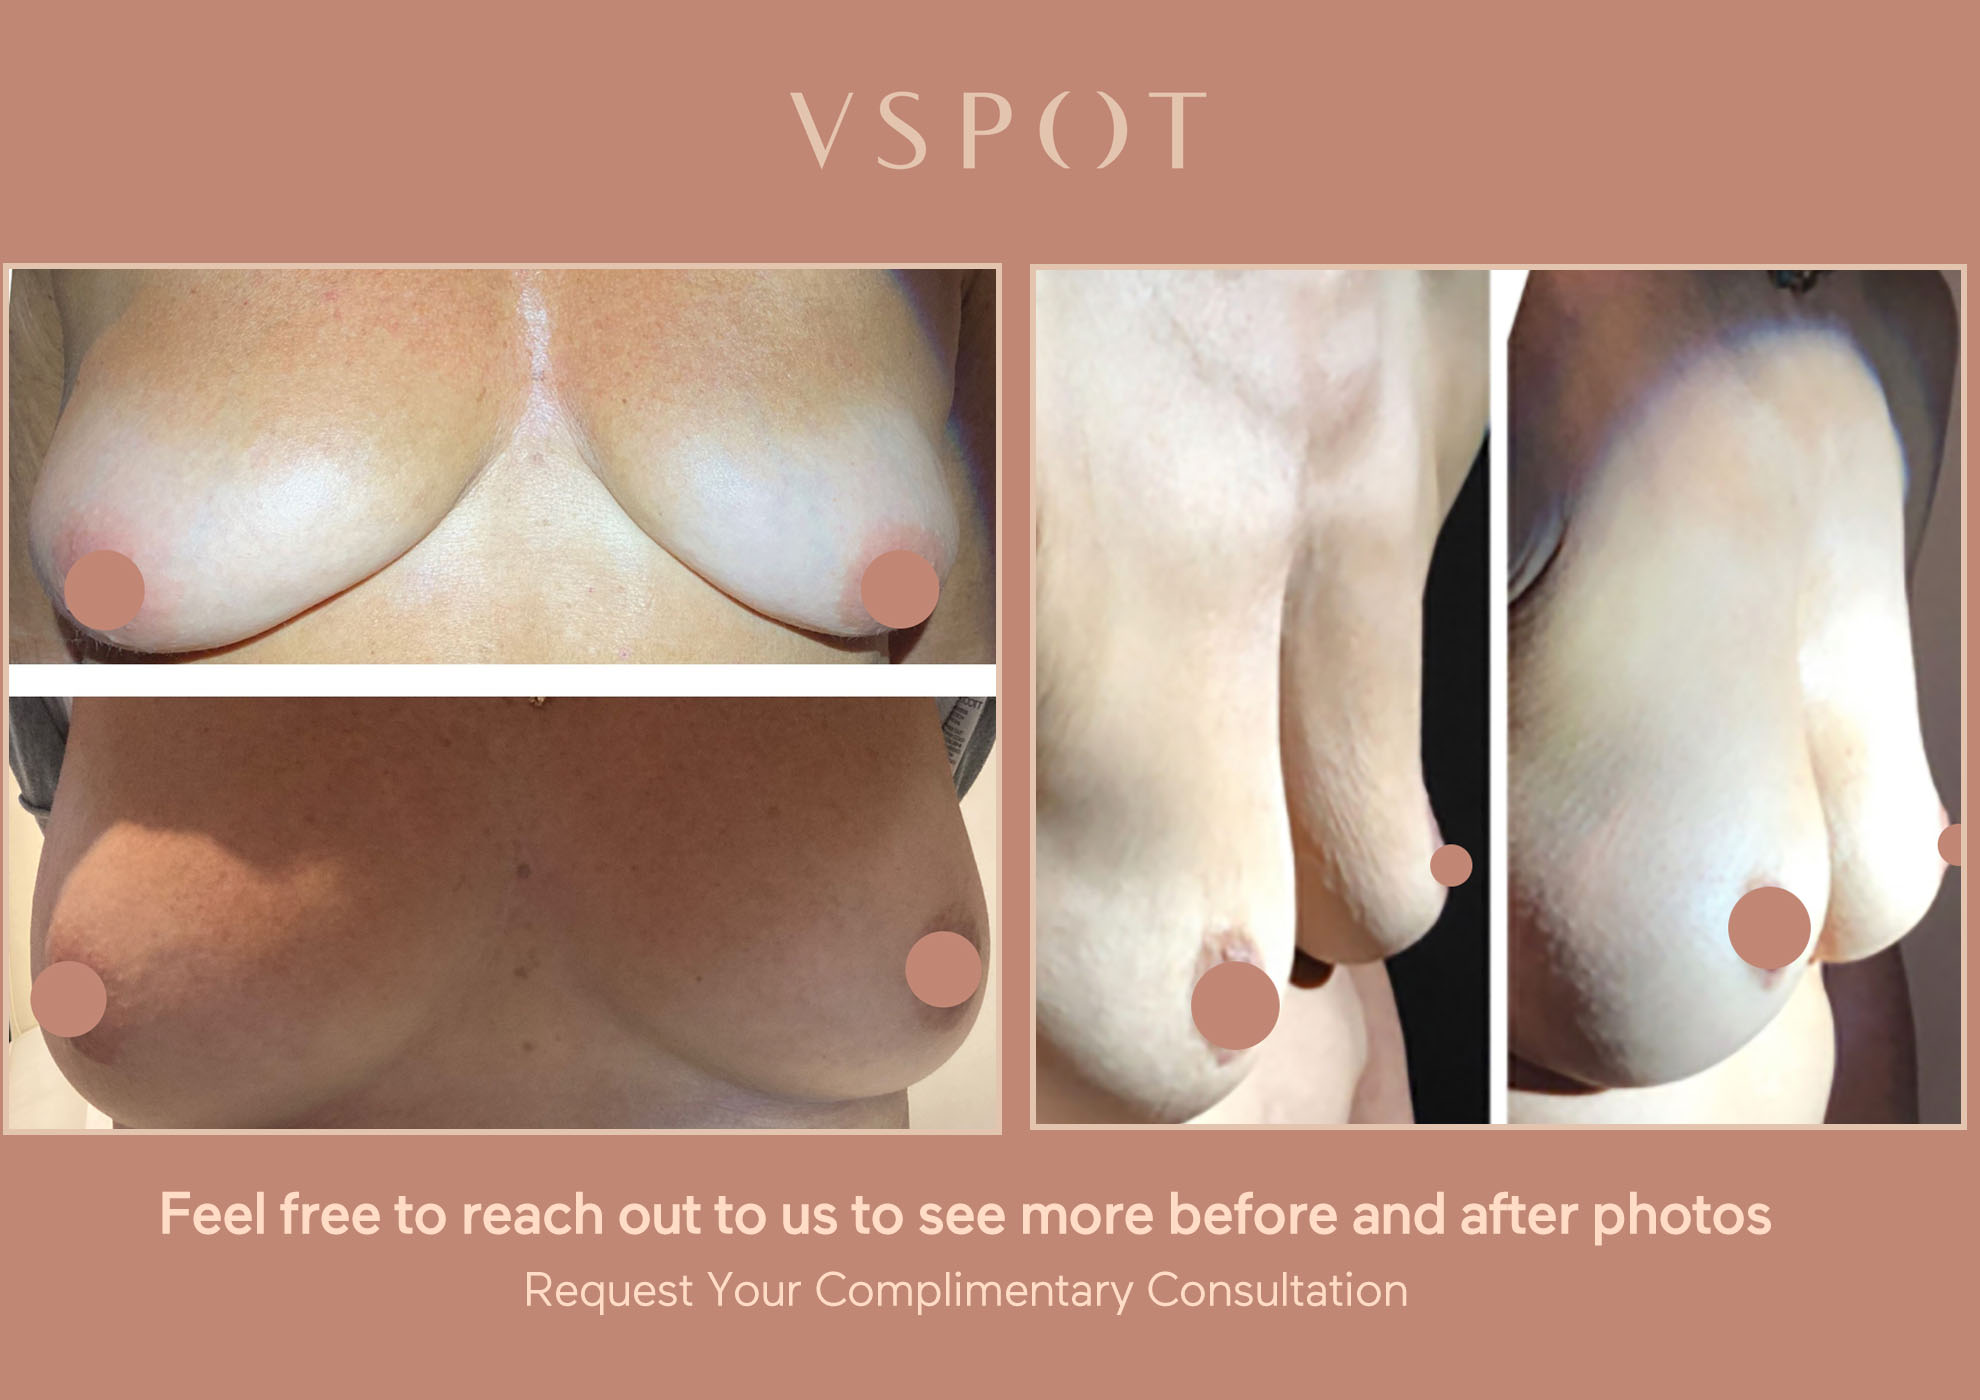 Vampire-Breast-Lift-Vspot-before-and-after-photo